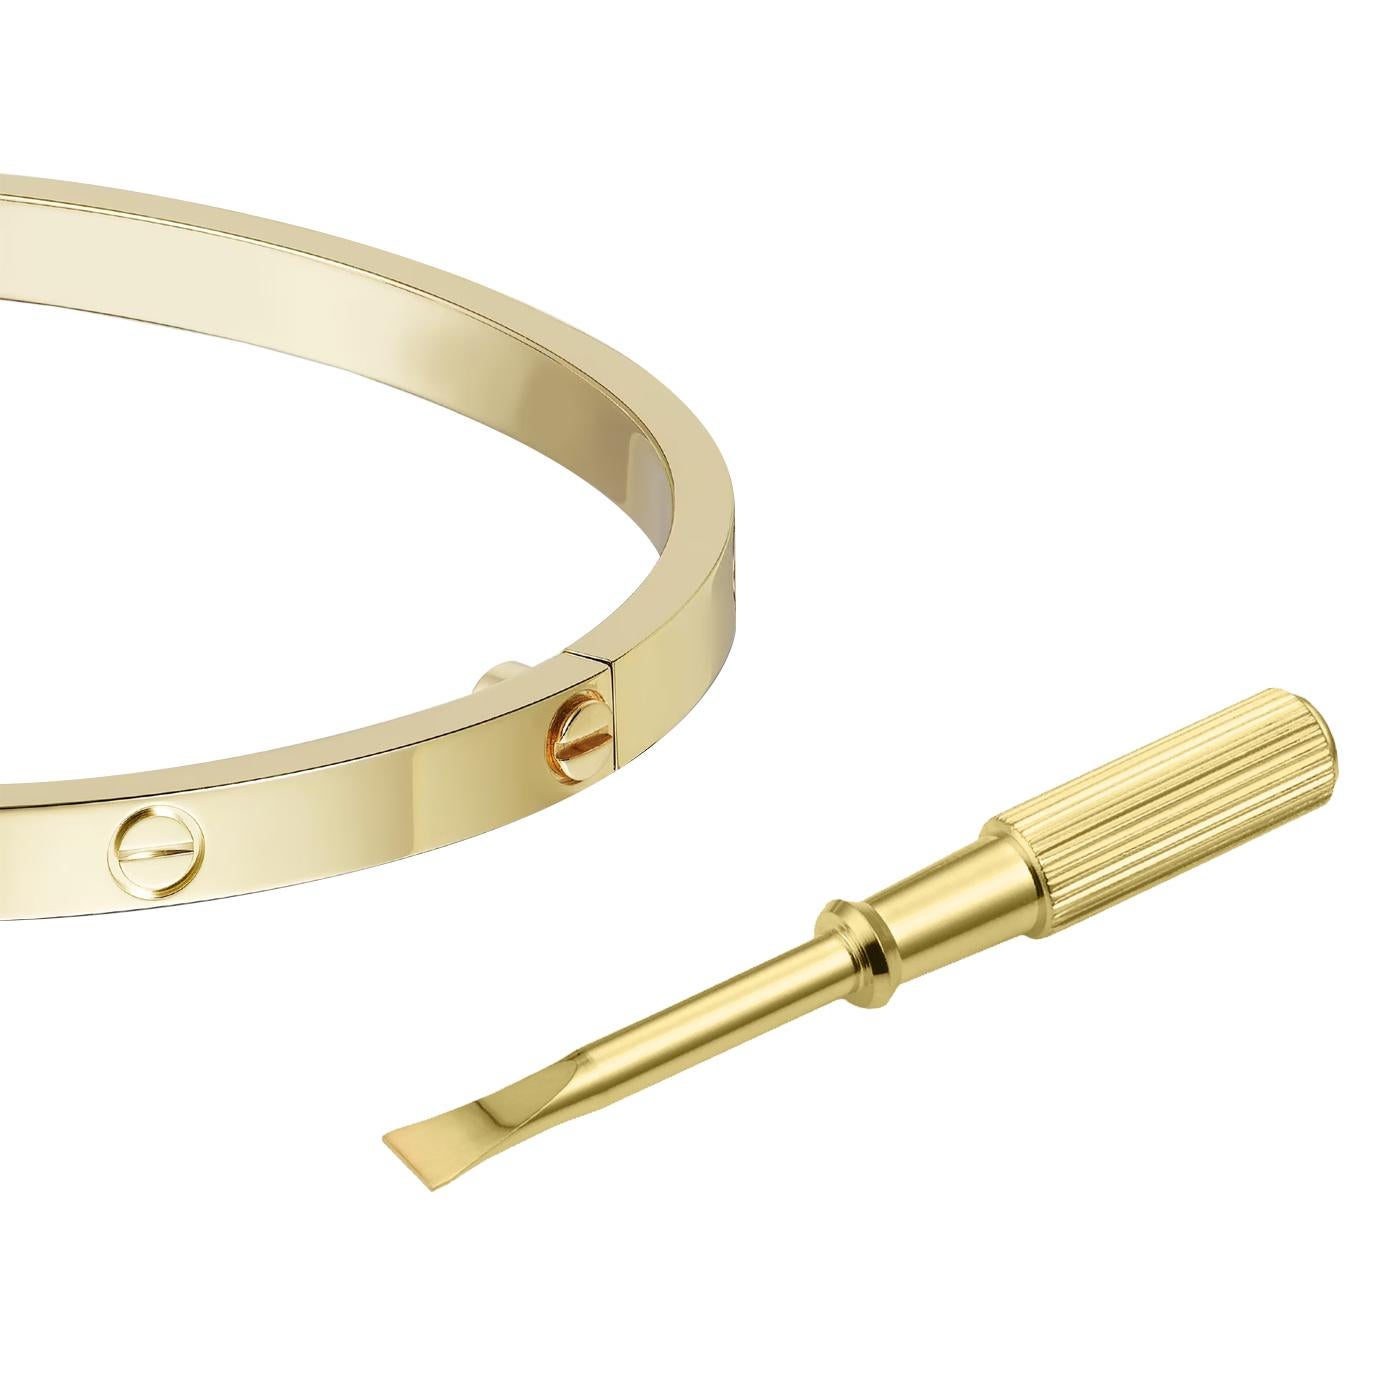 Modernist Cartier Love Bracelet 18K Yellow Gold Size 15 Small Model with a Screwdriver